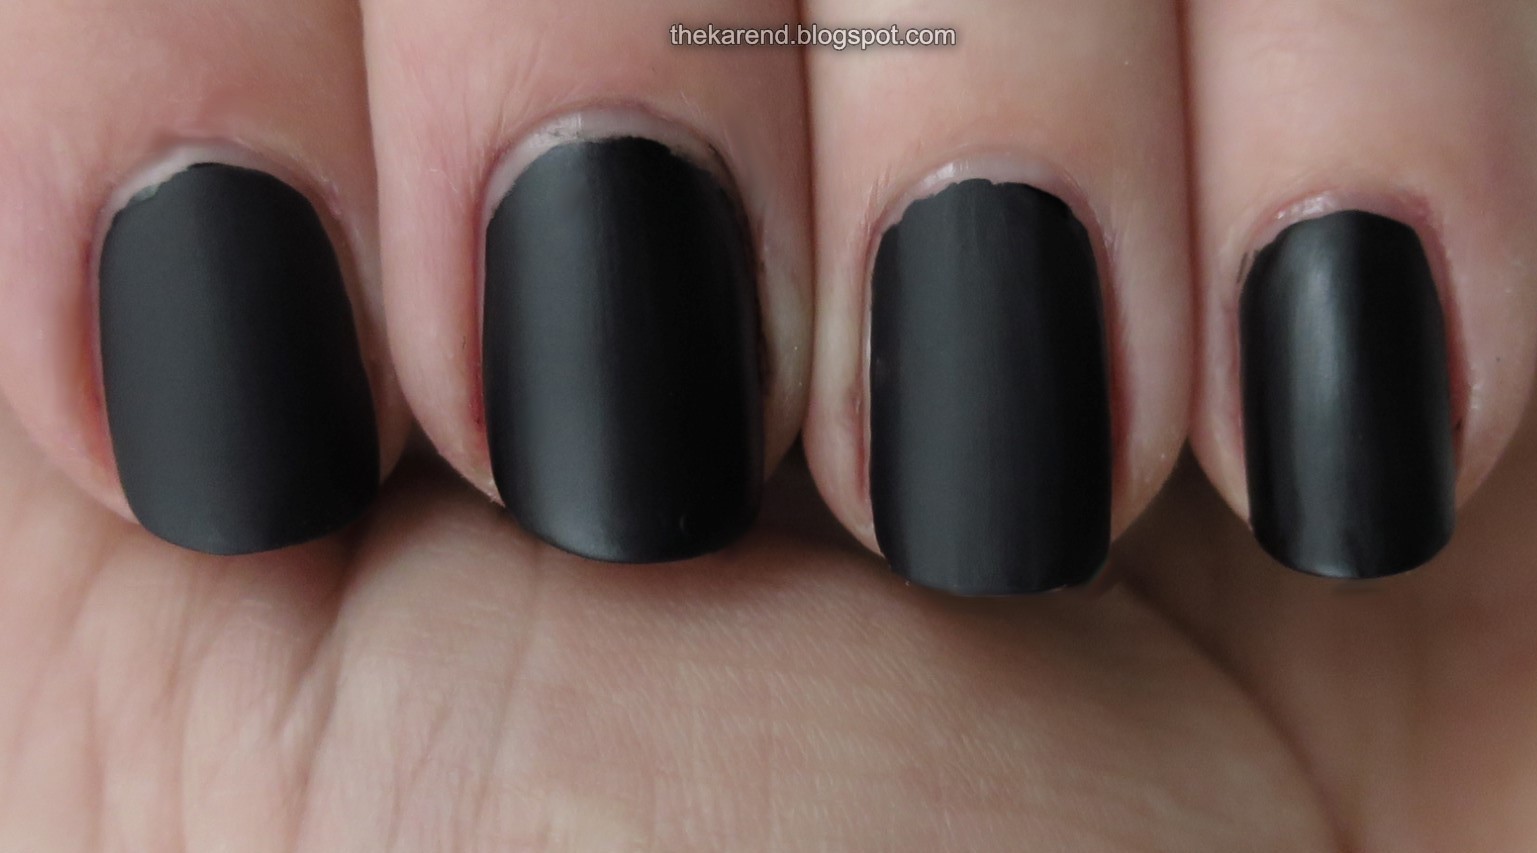 Frazzle and Aniploish: Matte Topcoat Comparisons, Part 15